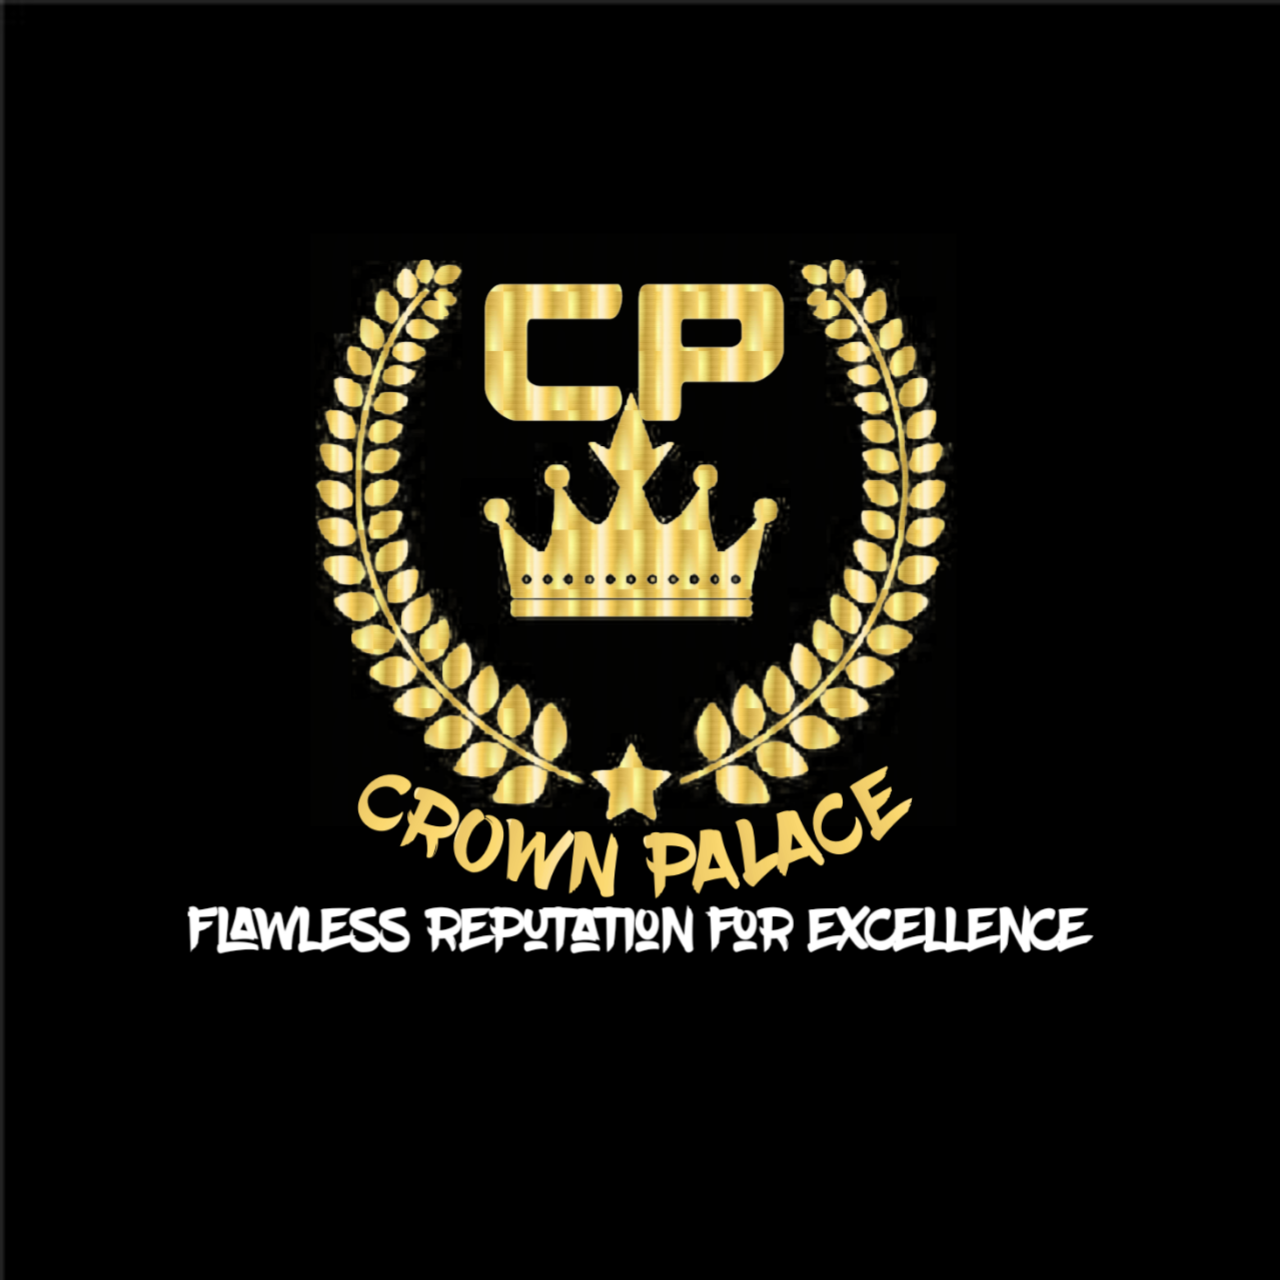 Crown palace provider